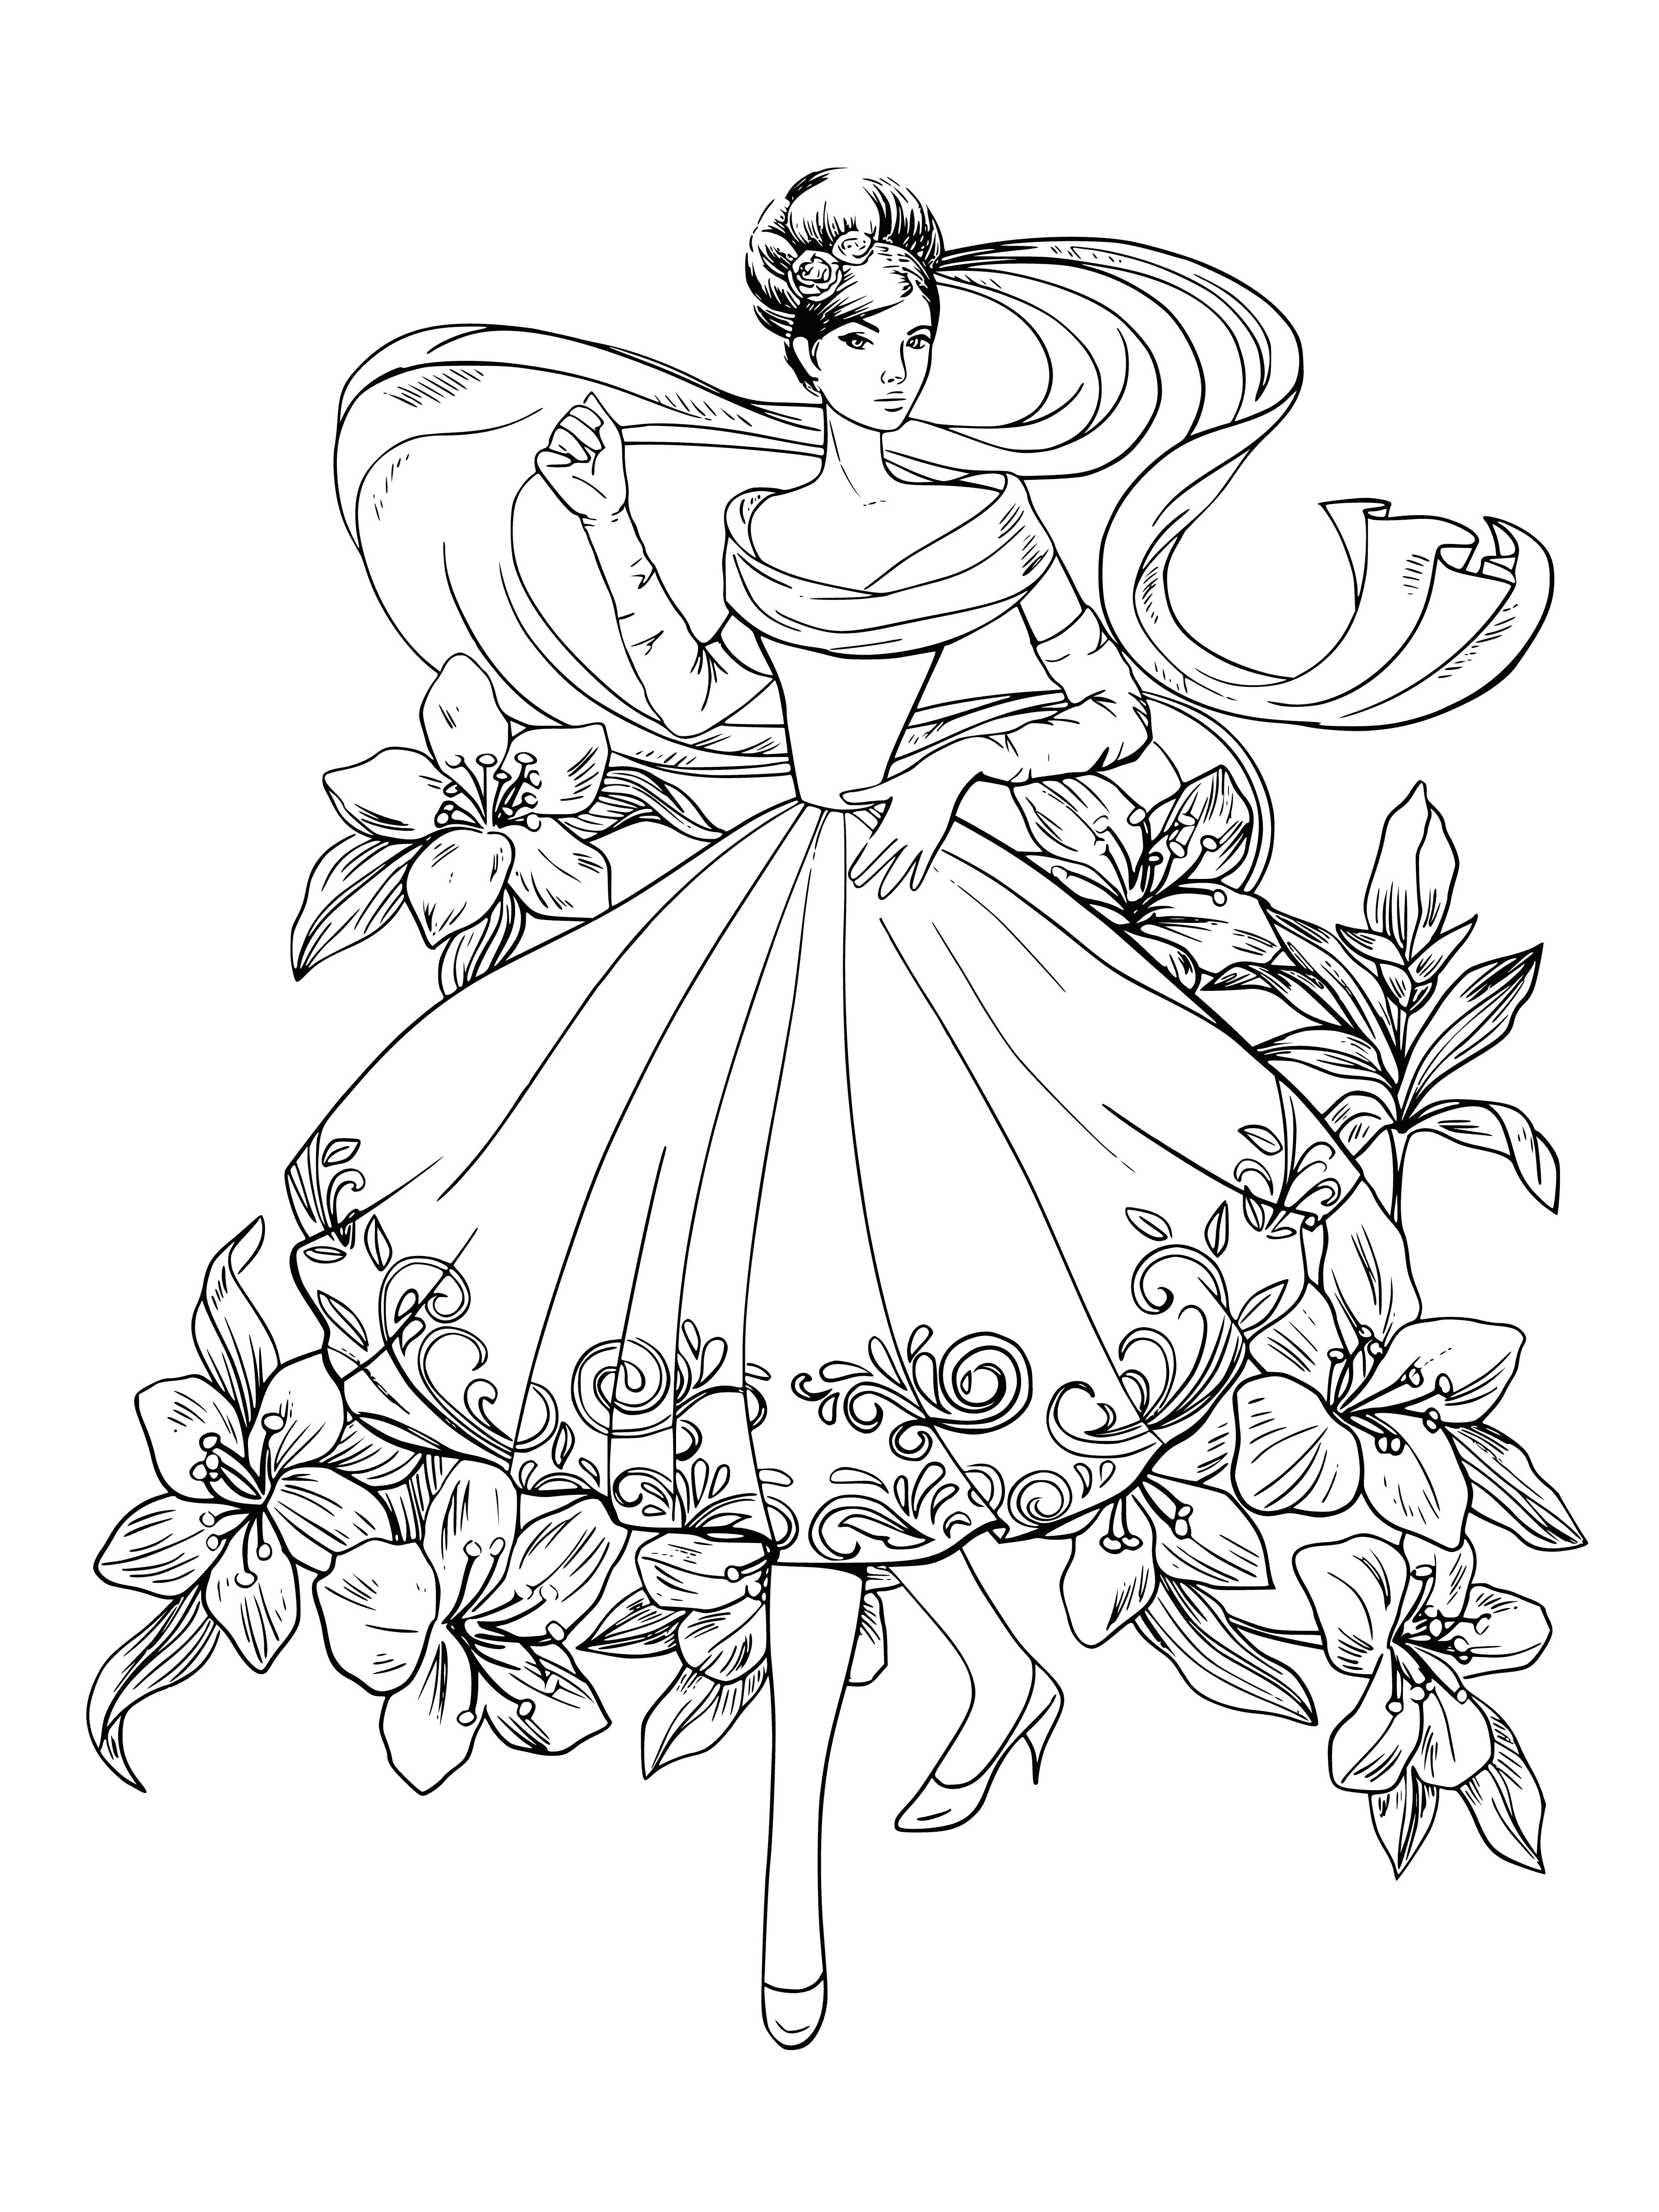 coloring page: Girl looks elegant standing in front of flowers, ribbon in hair & slight smile.